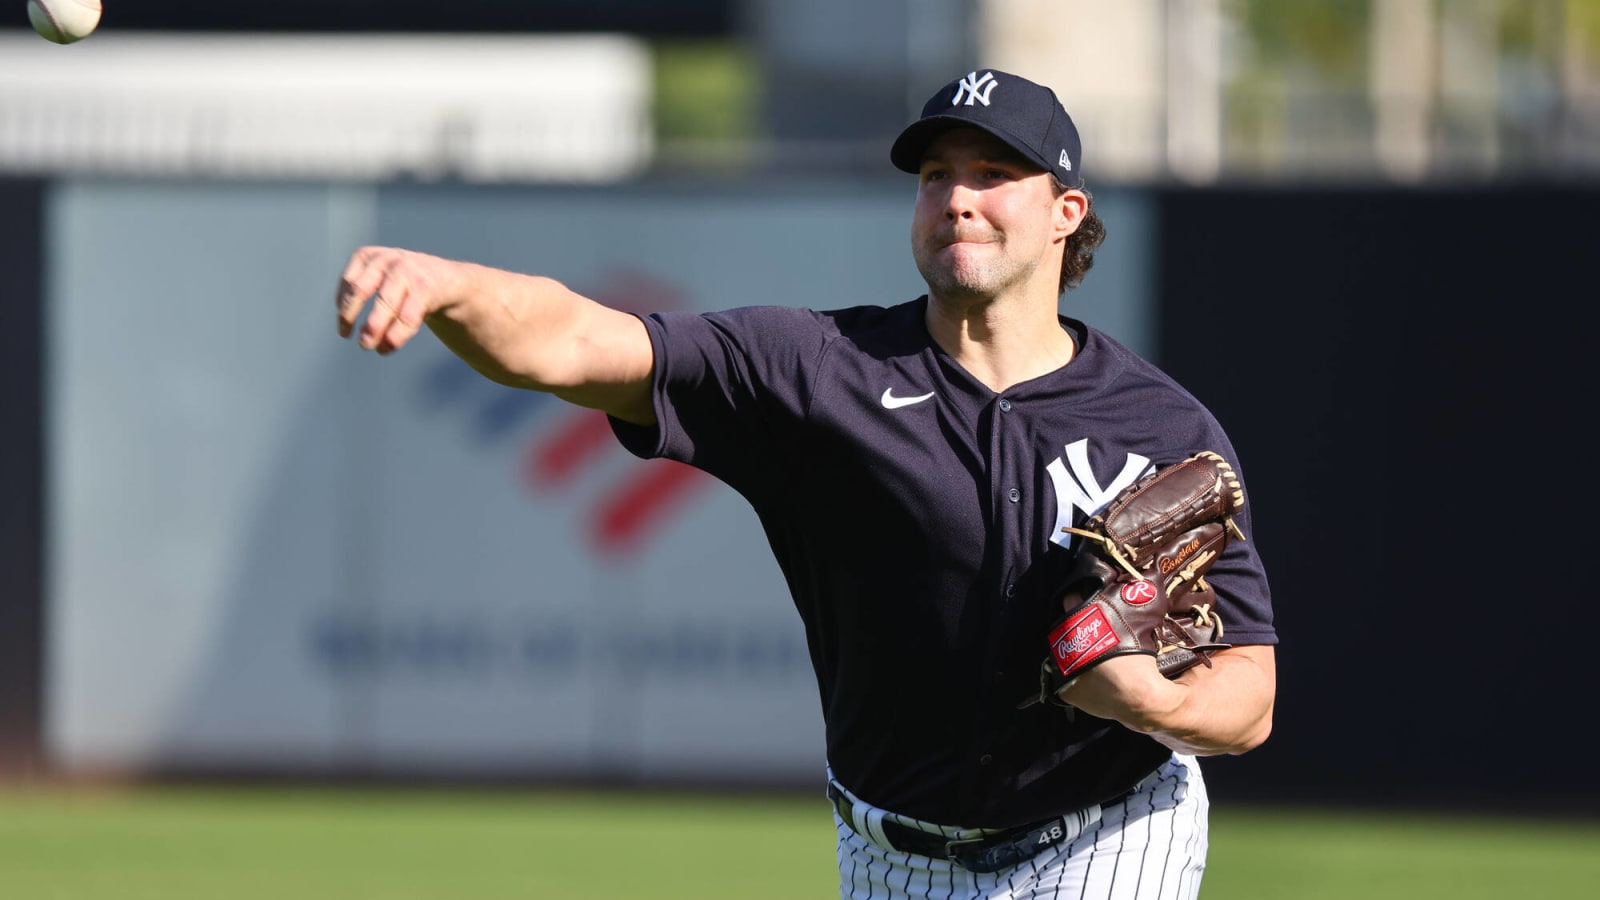 Yankees close to getting $11.5 million bullpen investment back from injury